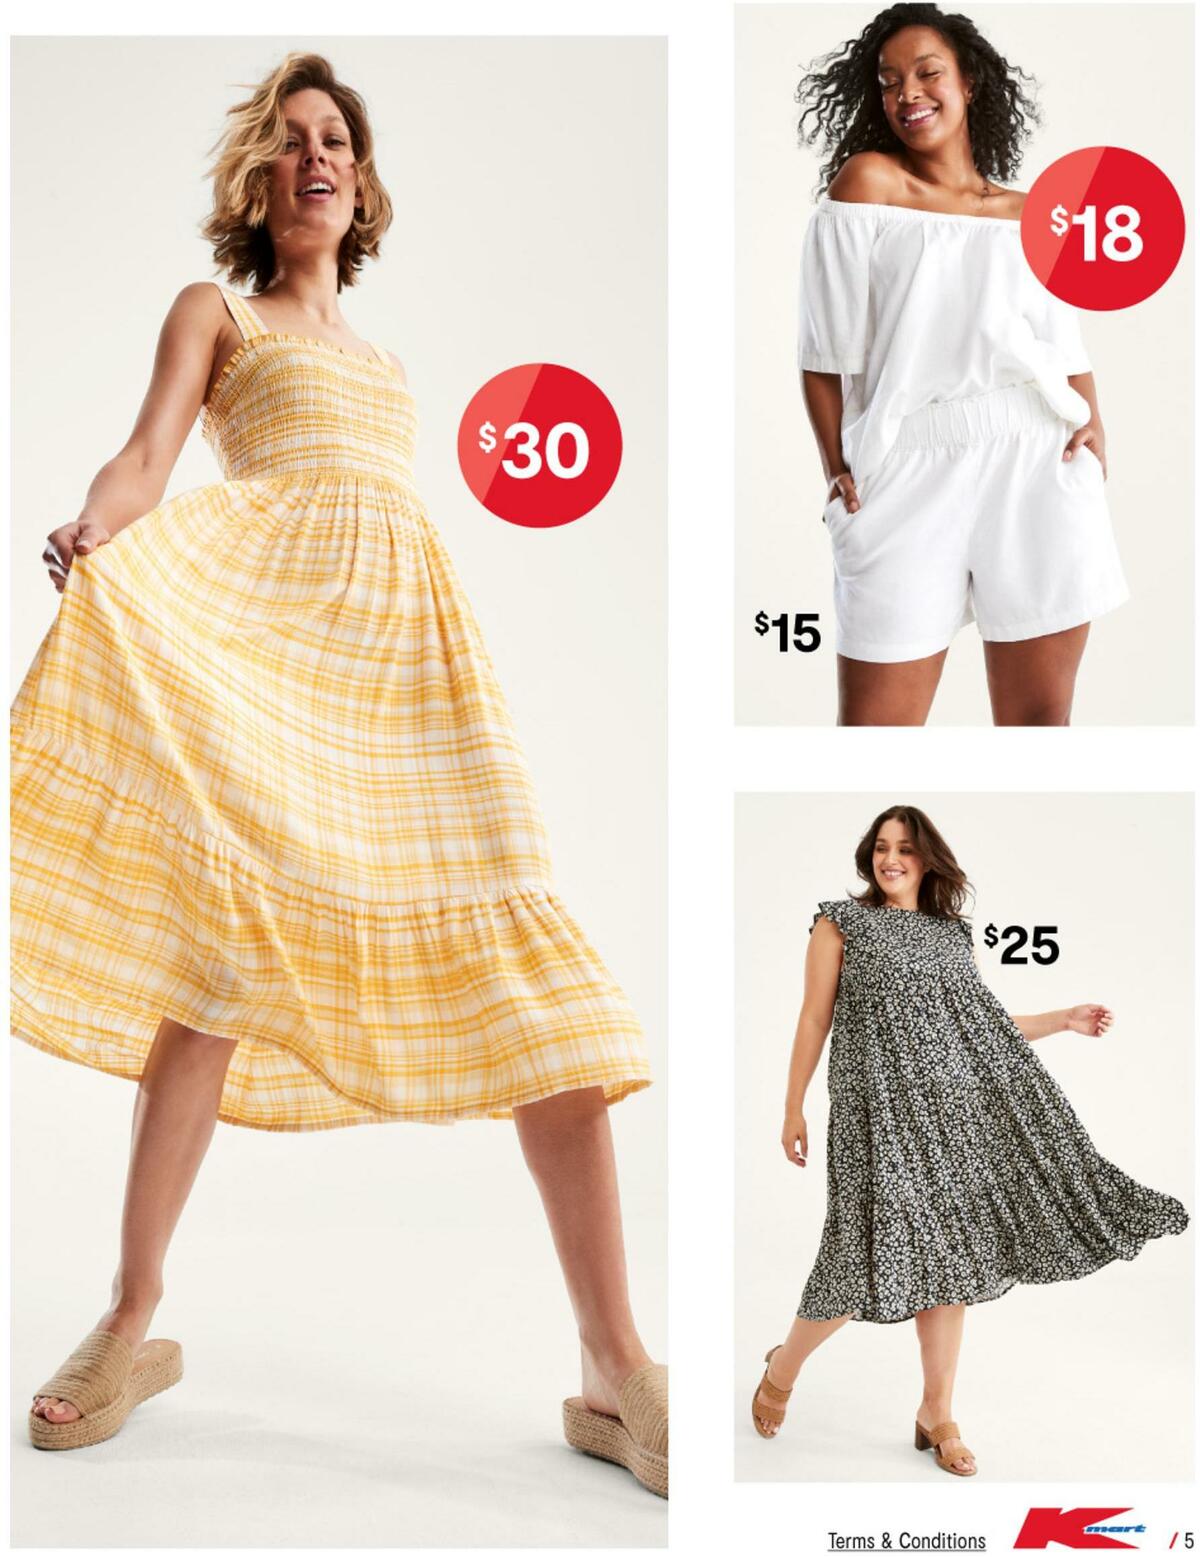 Kmart Catalogues from 1 December